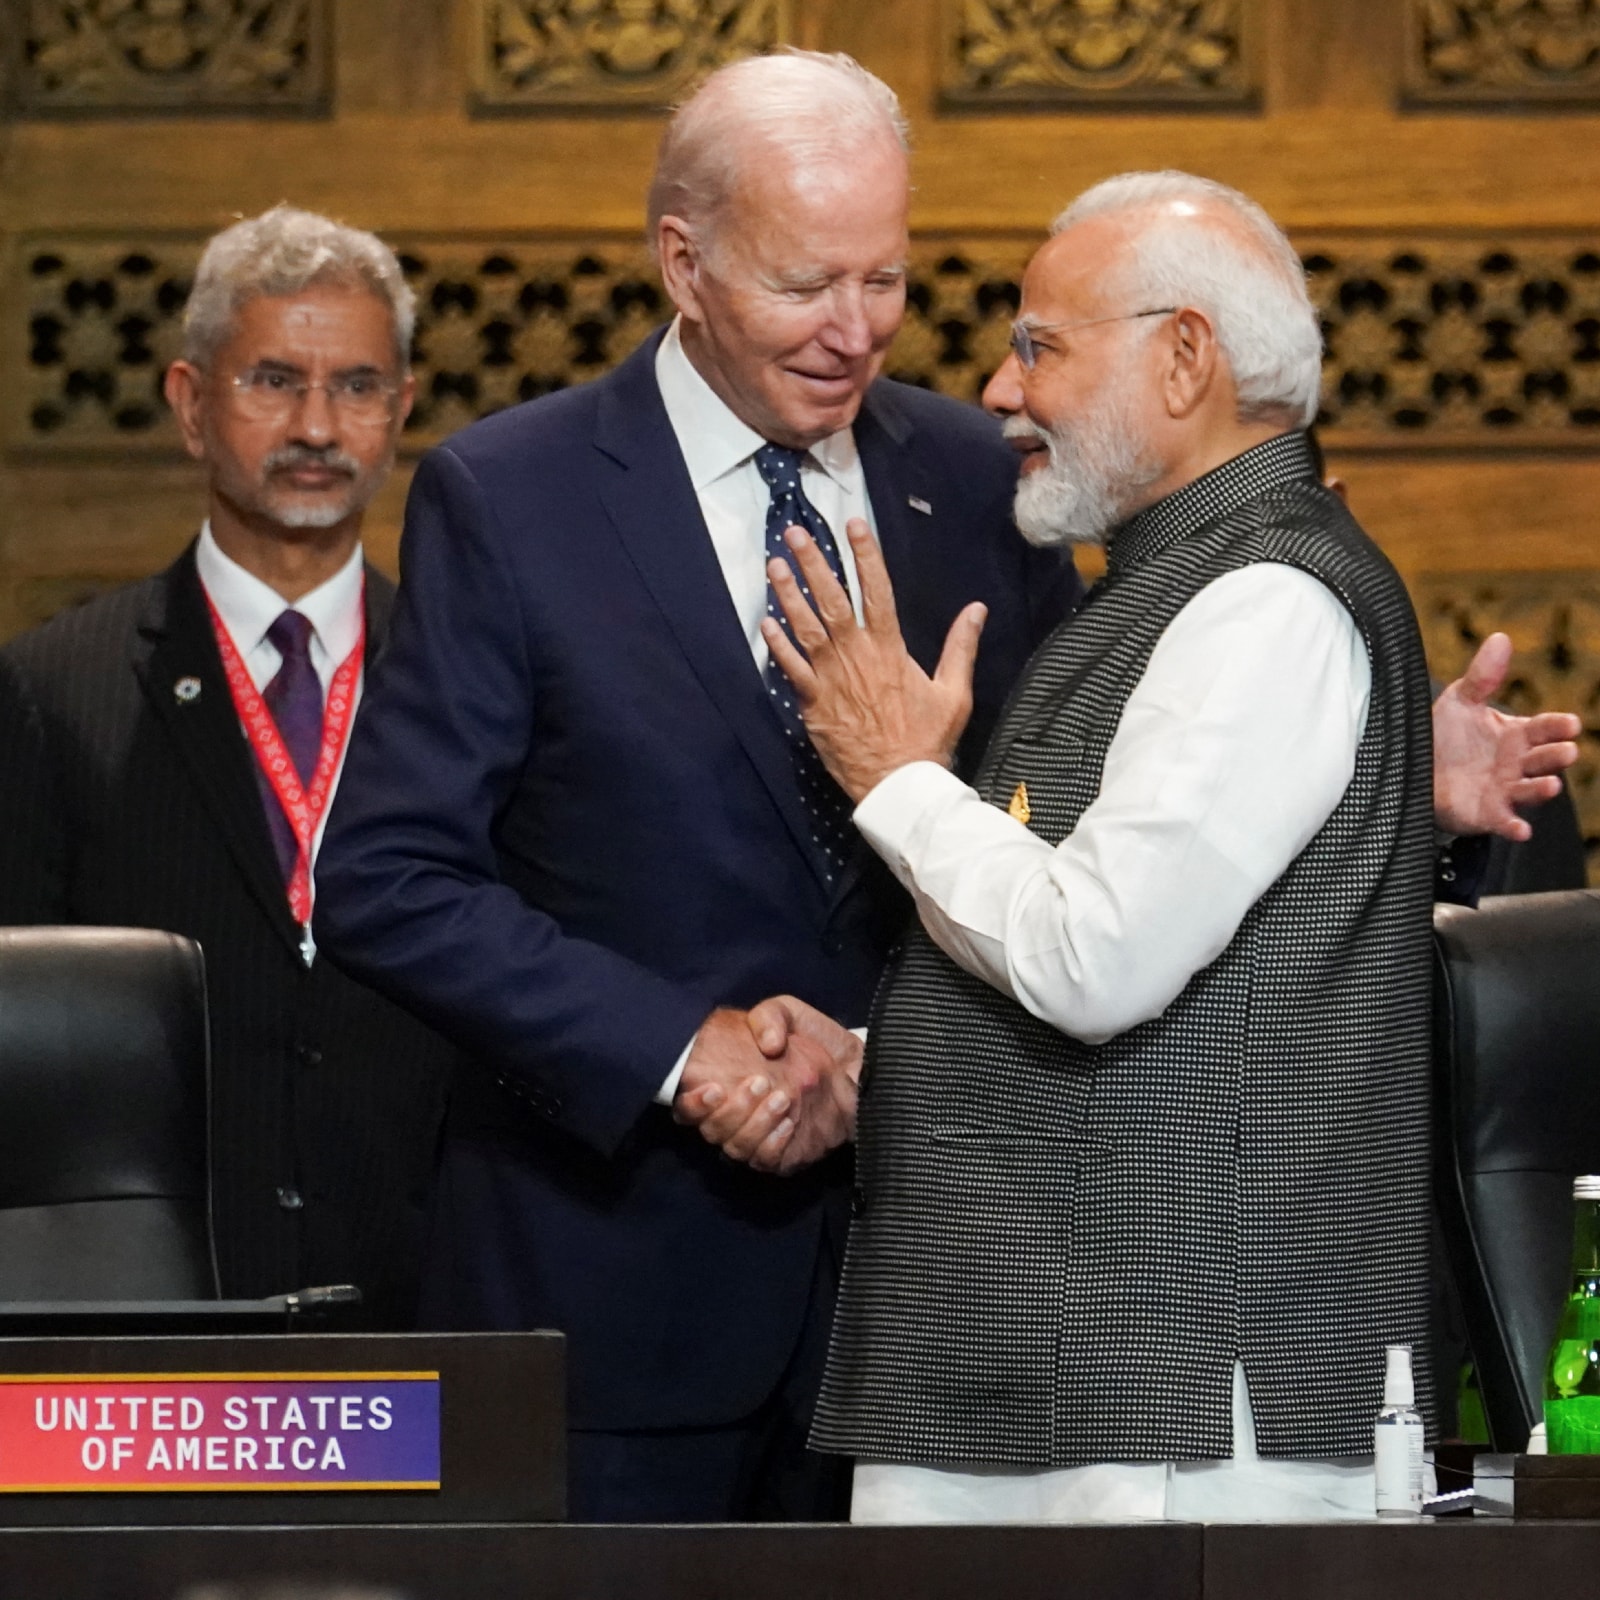 Biden may host PM Modi for State Dinner this summer: Report